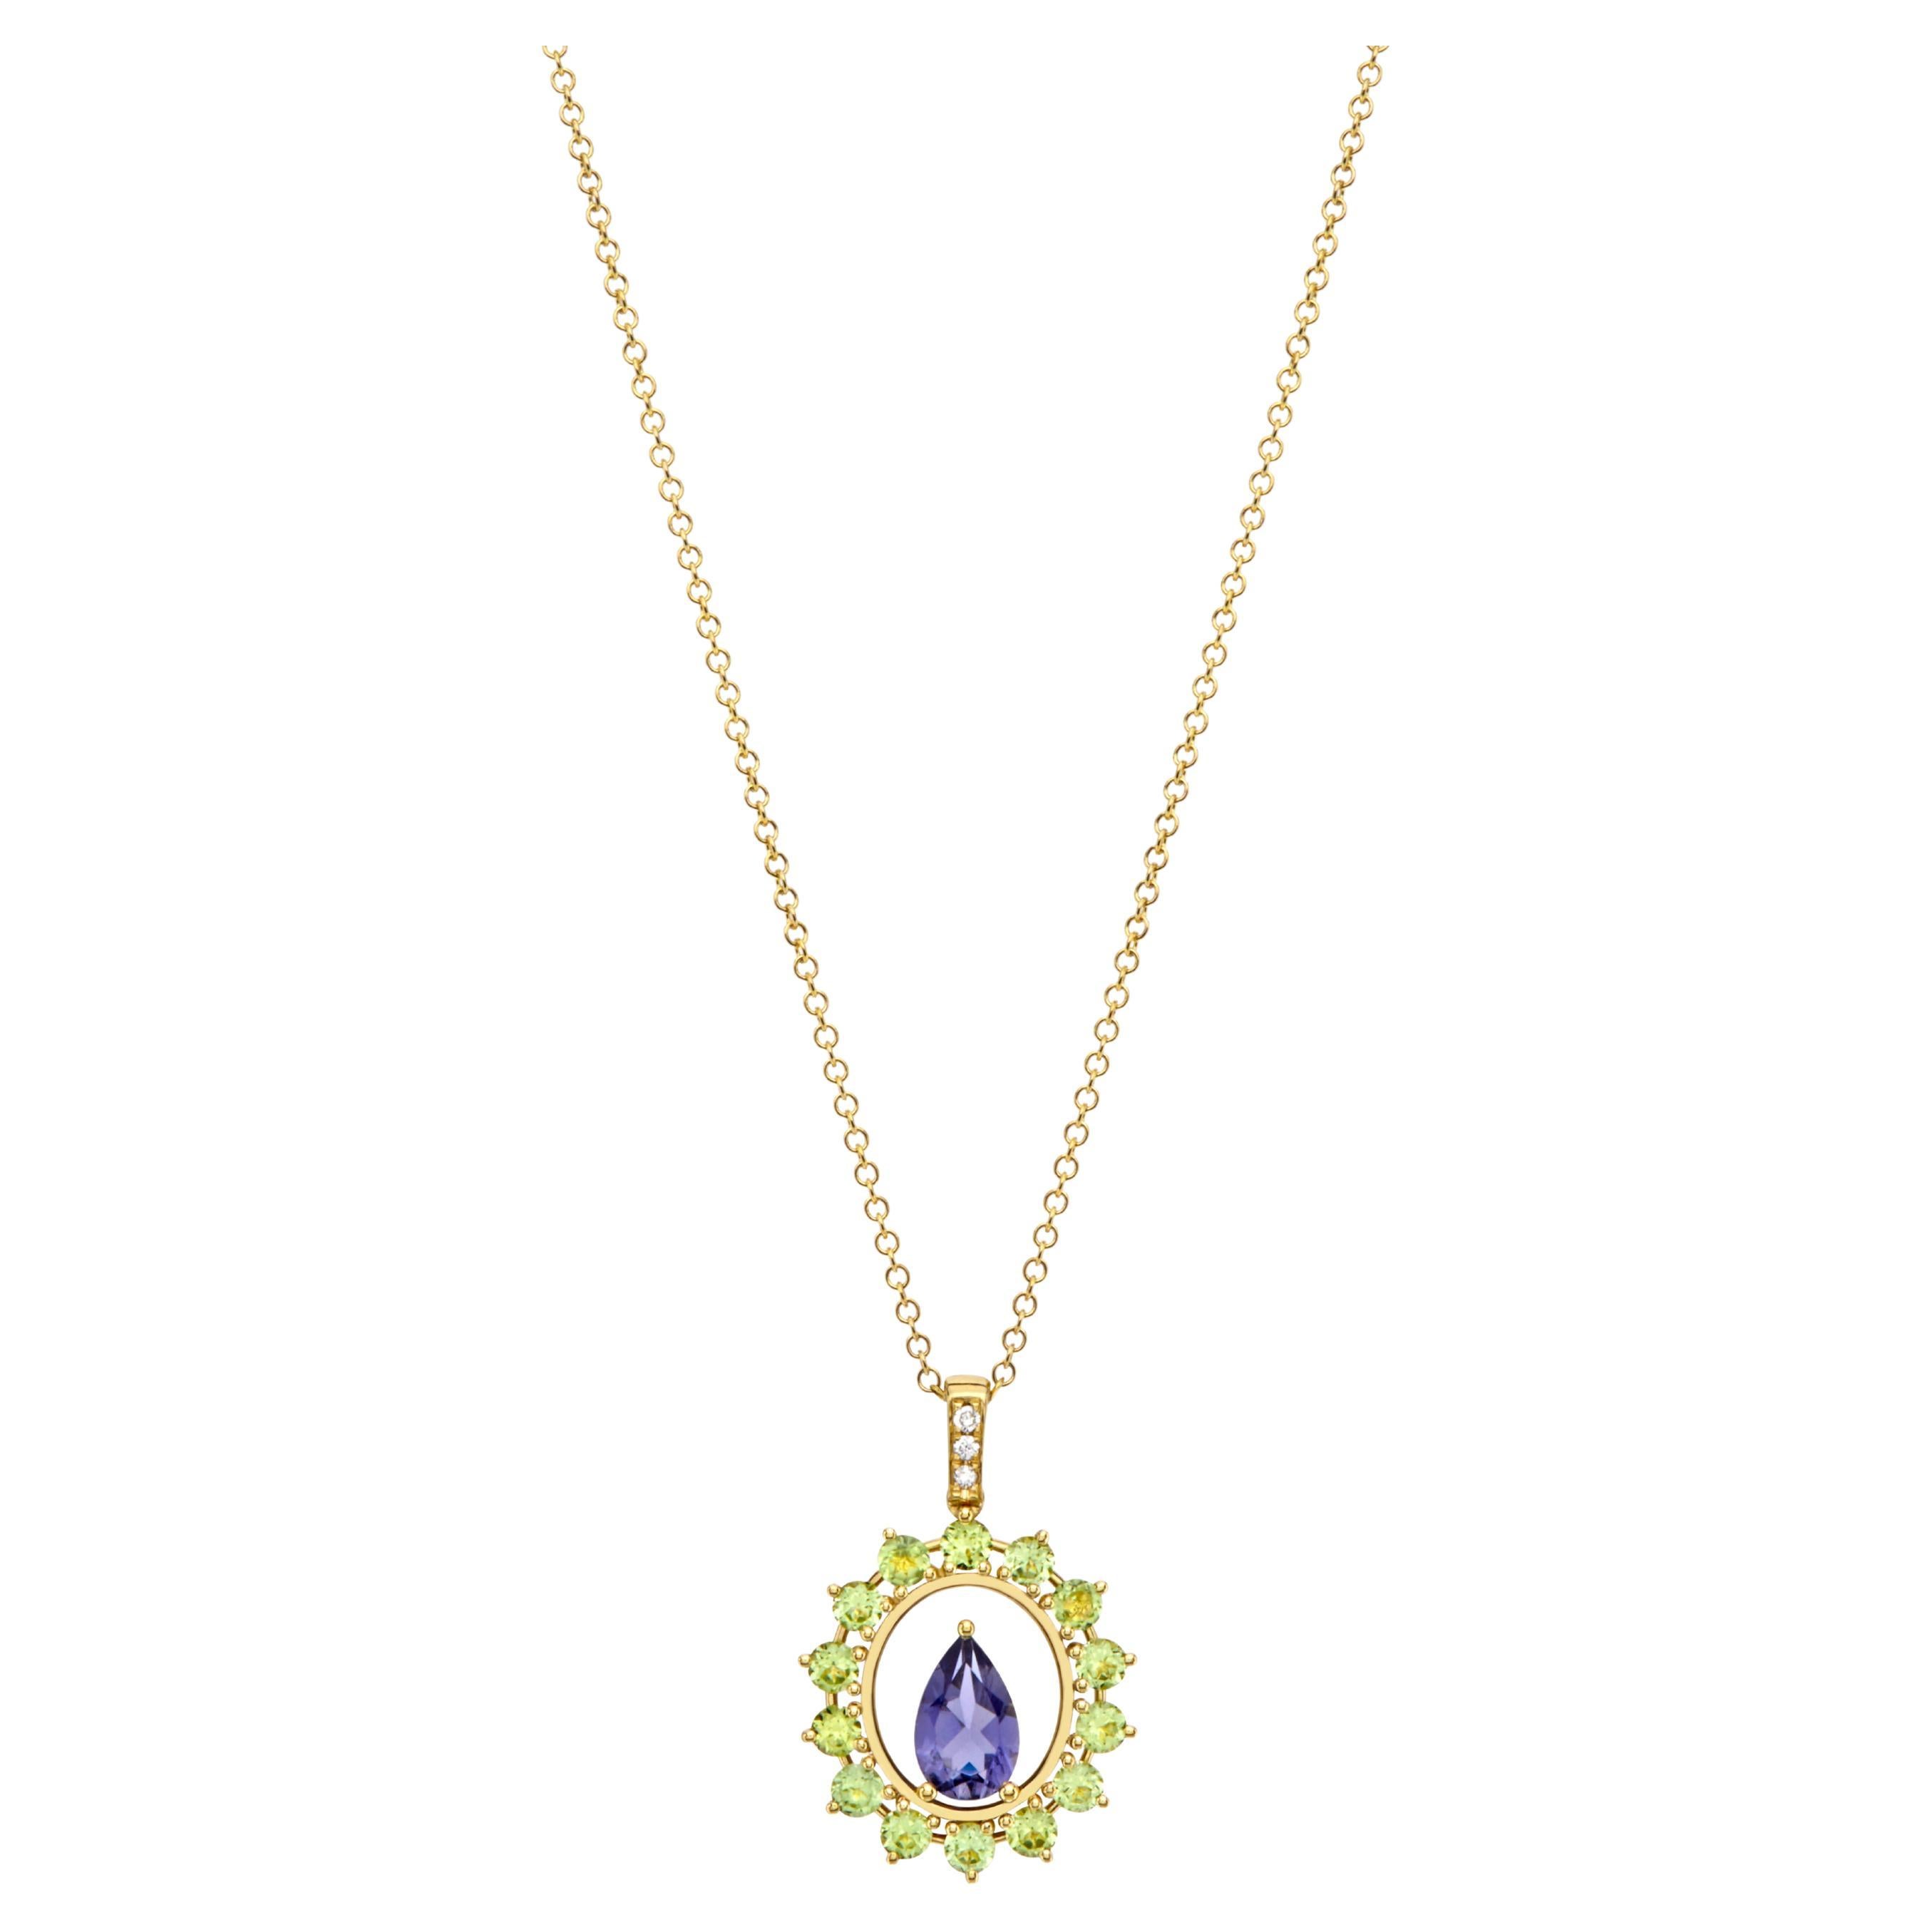 Prong Oval Shape Pendant Necklace 18Kt Yellow Gold with Peridot Iolite Diamond